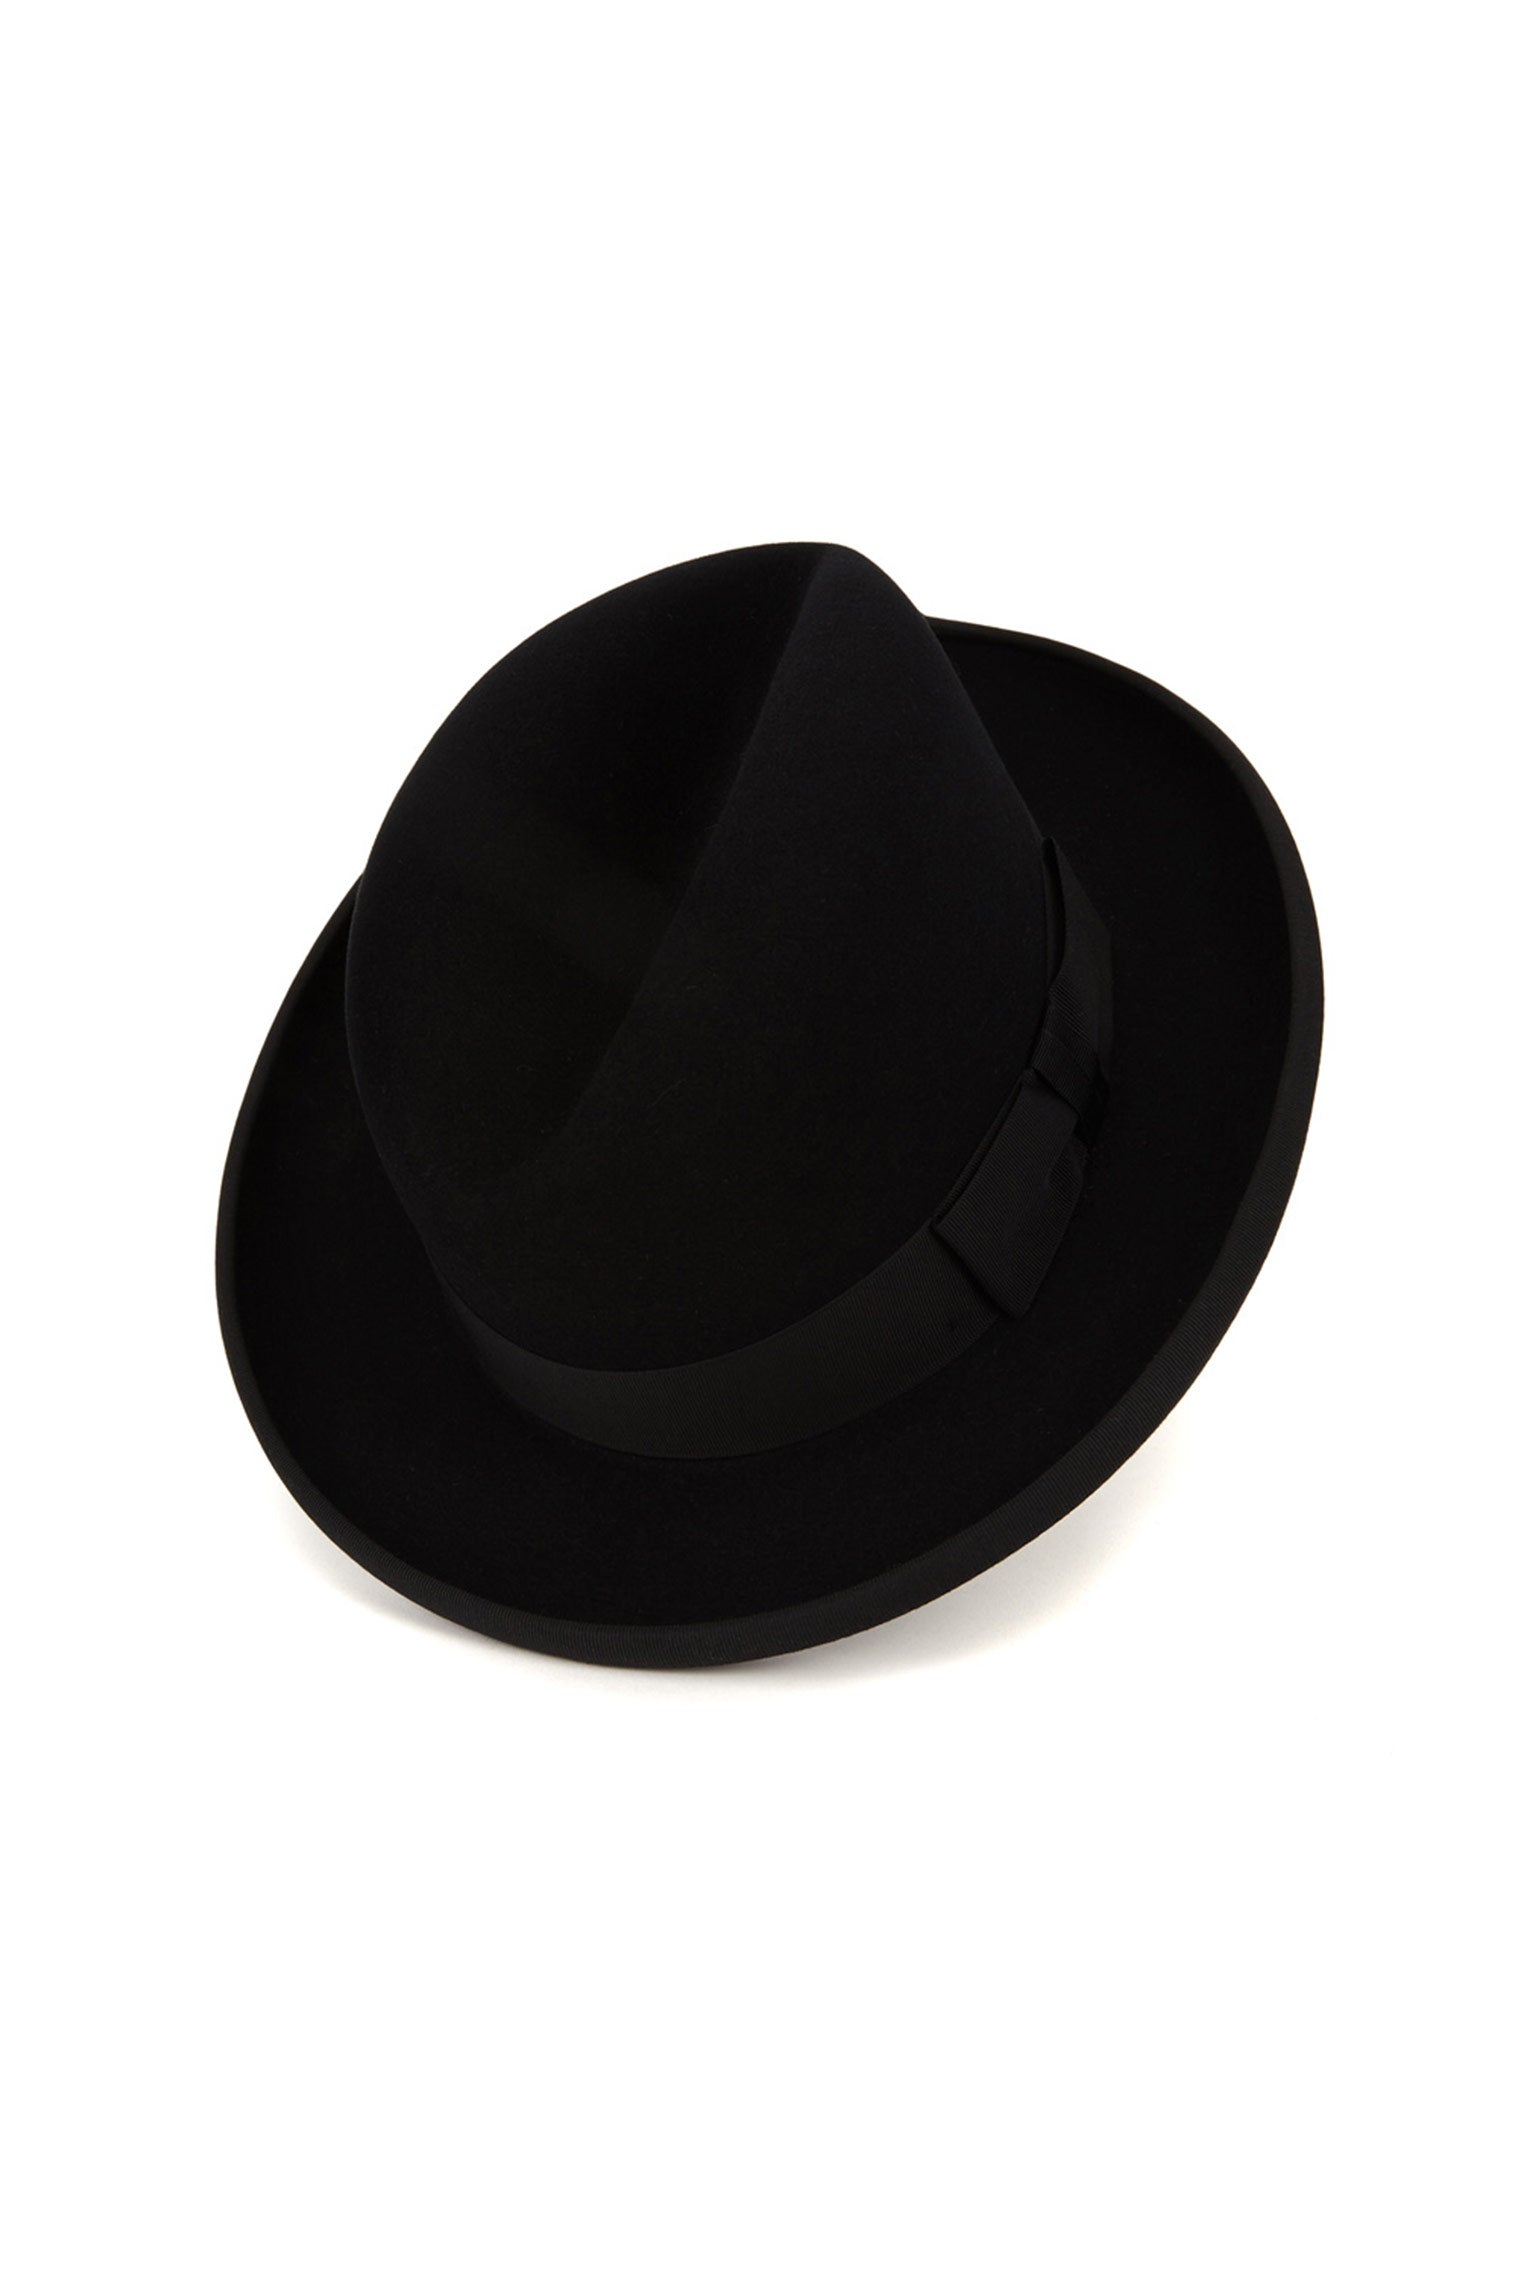 Eden Homburg - Hats for Tall People - Lock & Co. Hatters London UK